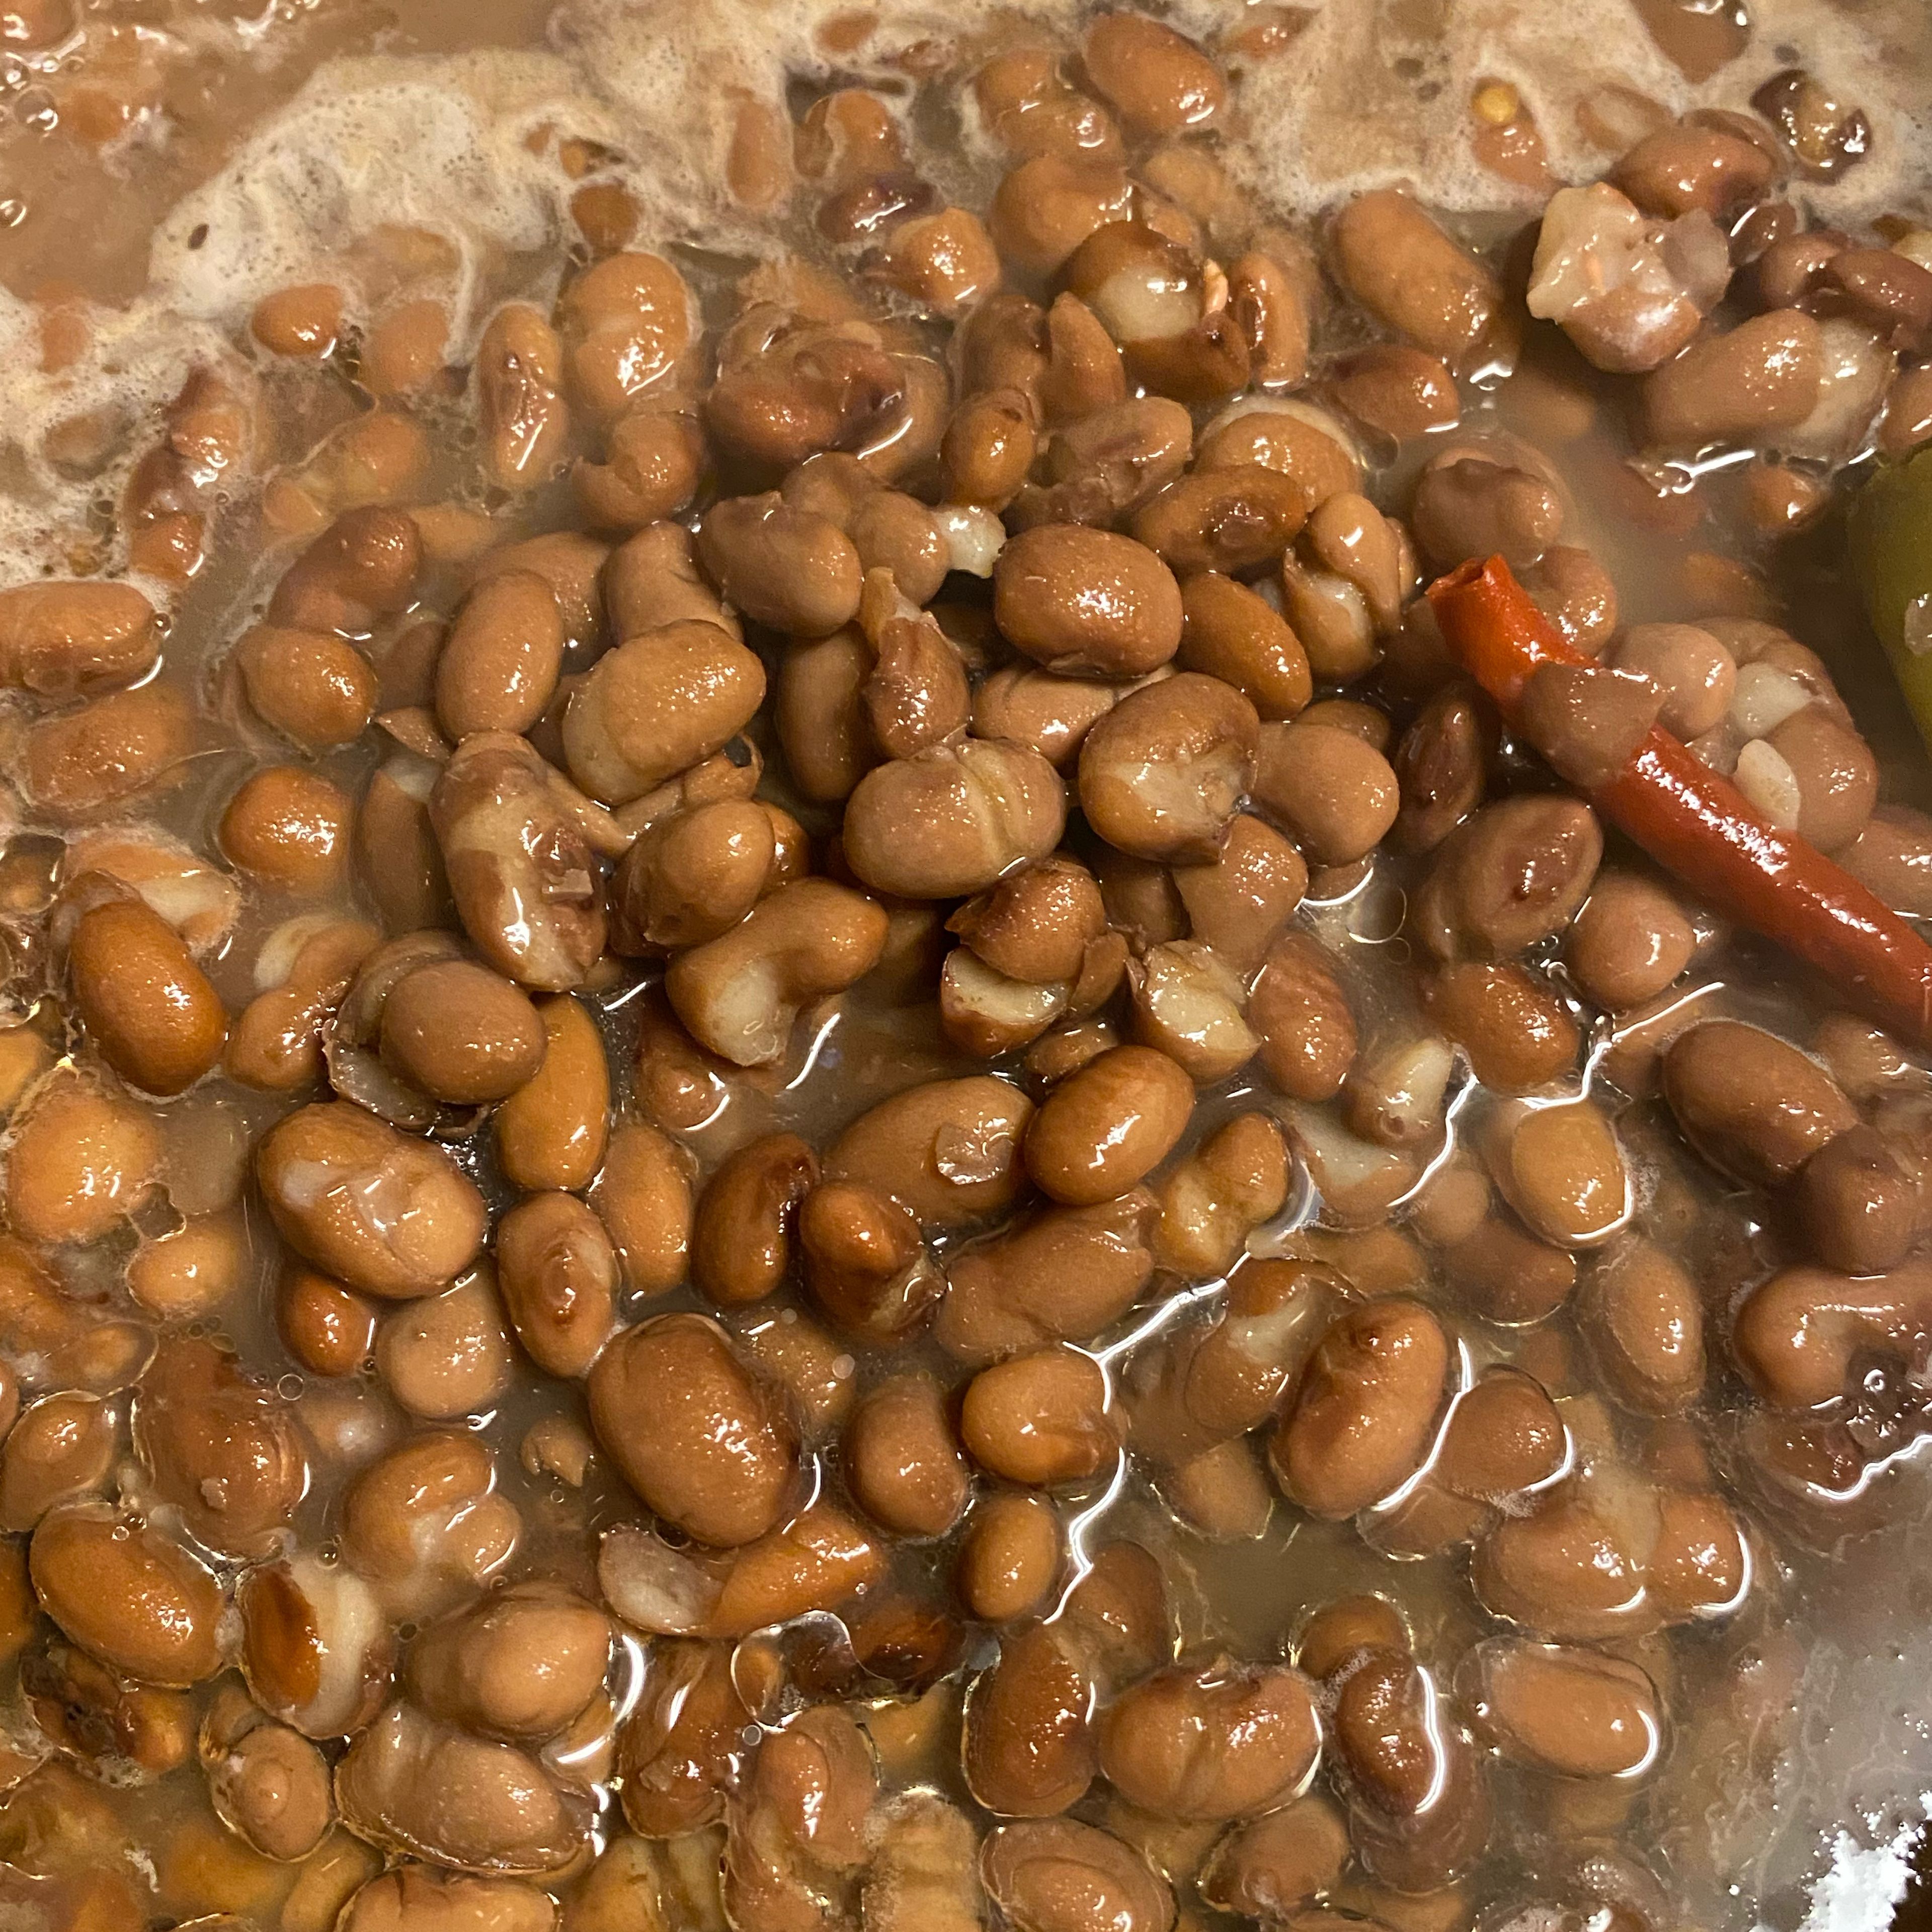 Taste the salt and check the amount of broth, if everything is good to you by now, they’re ready! Eat some right away! Let them cool before refrigerate them. Beans also freeze beautifully. You won’t need to buy can beans anymore! These are the staple of Mexican Cuisine!